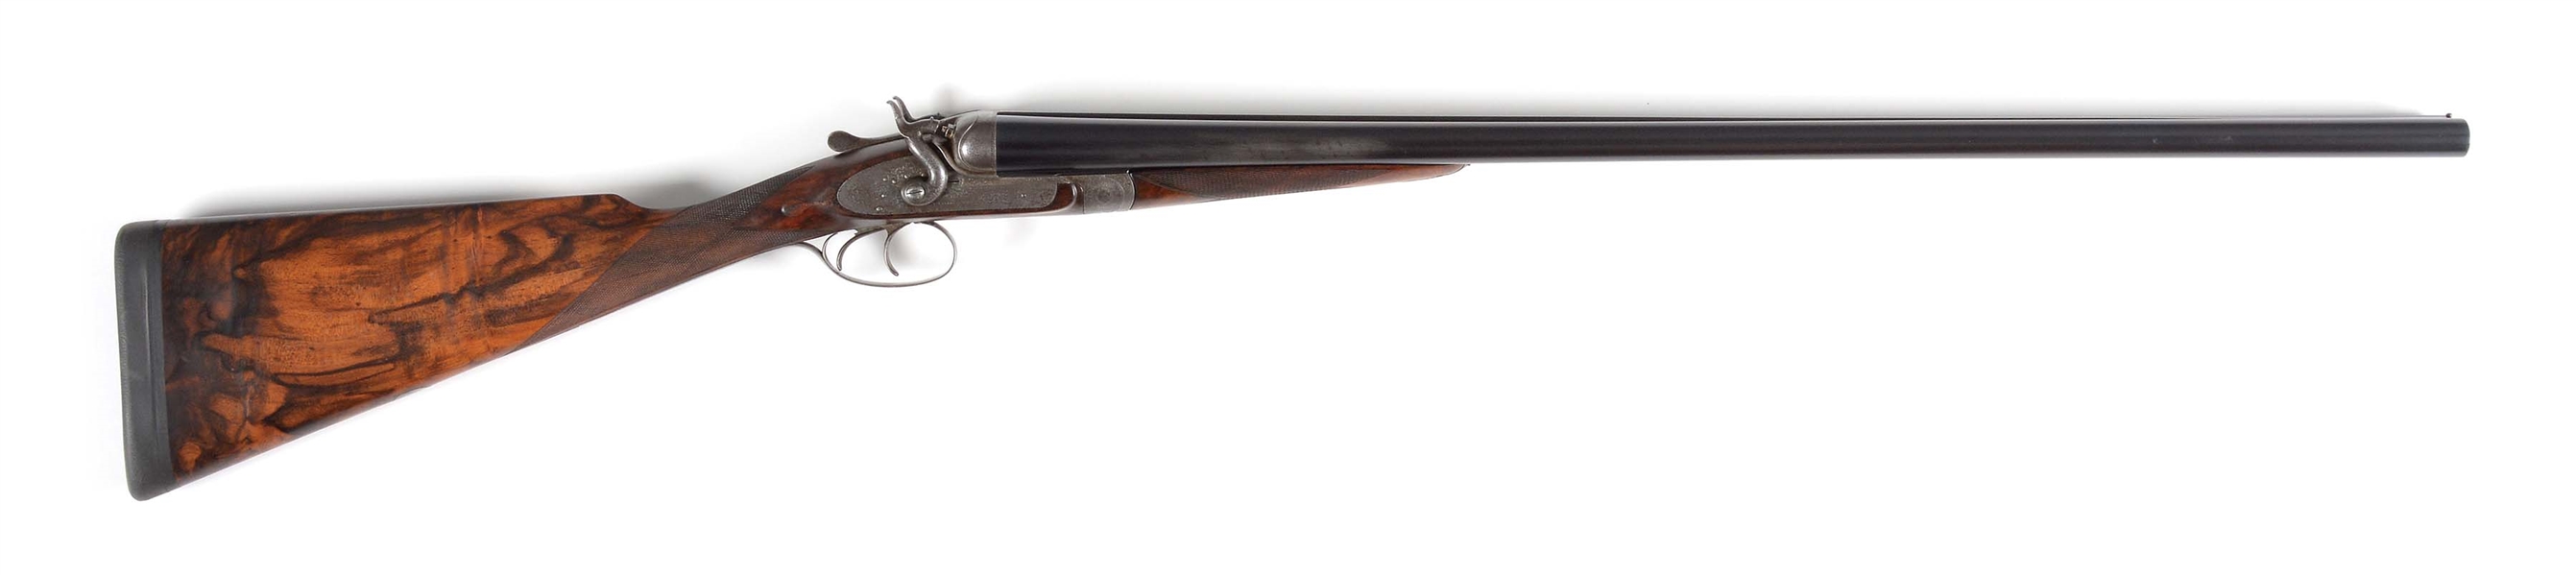 (A) PURDEY BAR-IN-WOOD TOP LEVER HAMMER 12 BORE SIDE BY SIDE SHOTGUN.